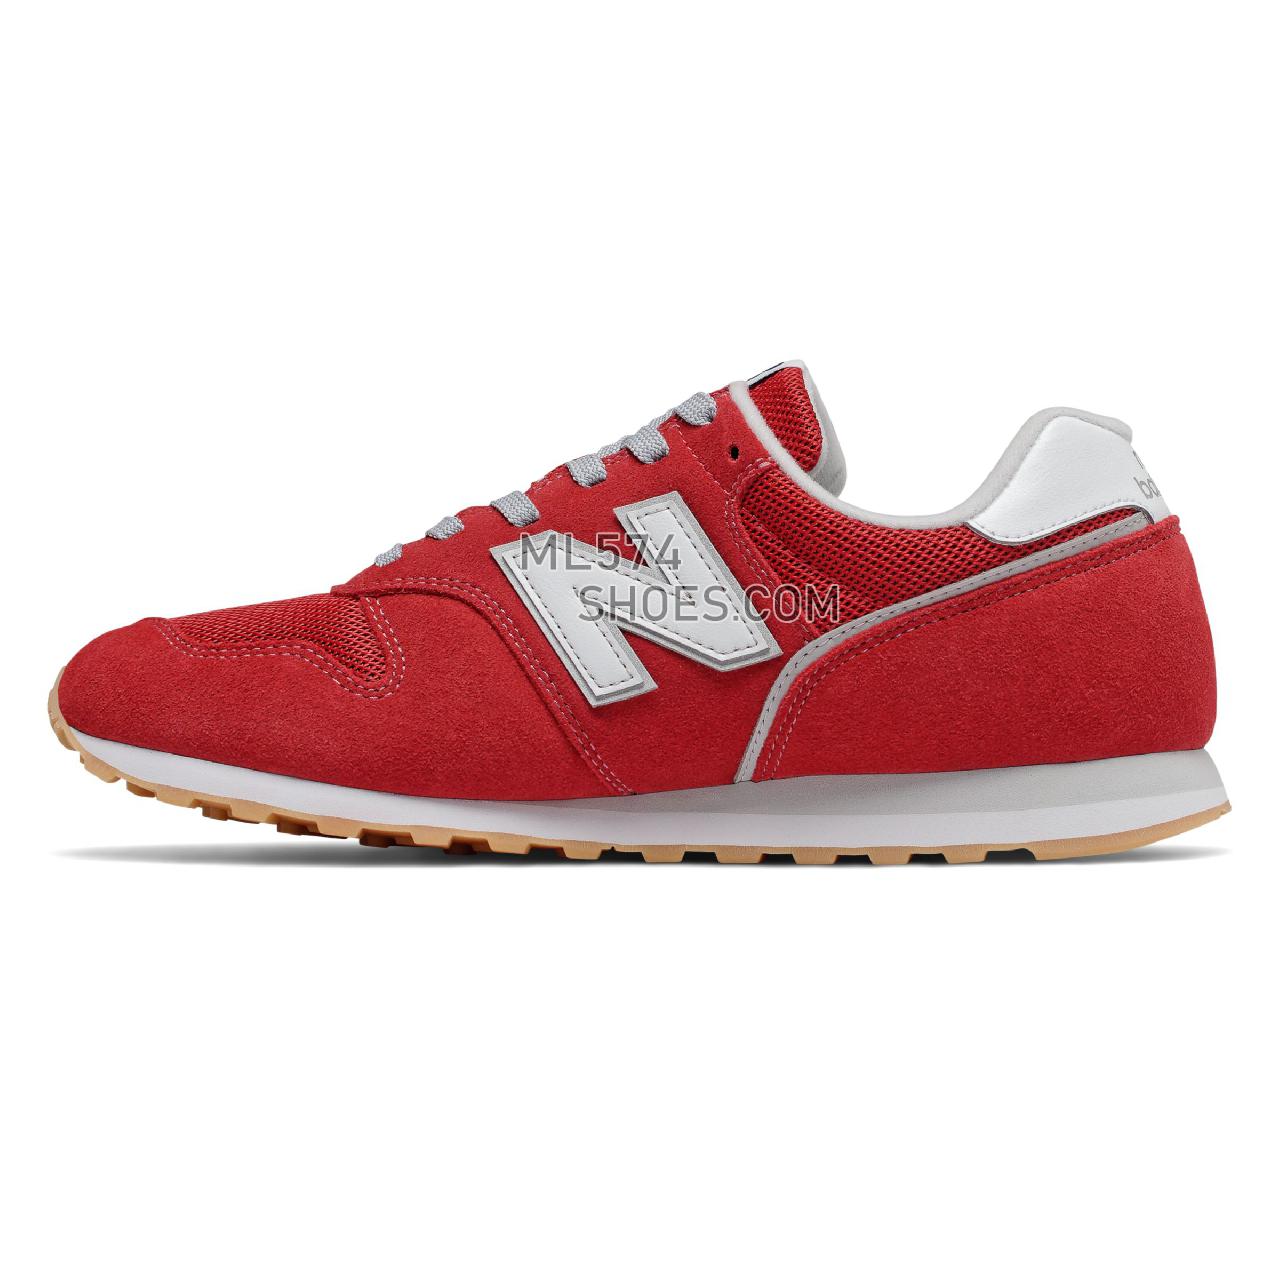 New Balance 373v2 - Men's Classic Sneakers - Team Red with White - ML373DE2